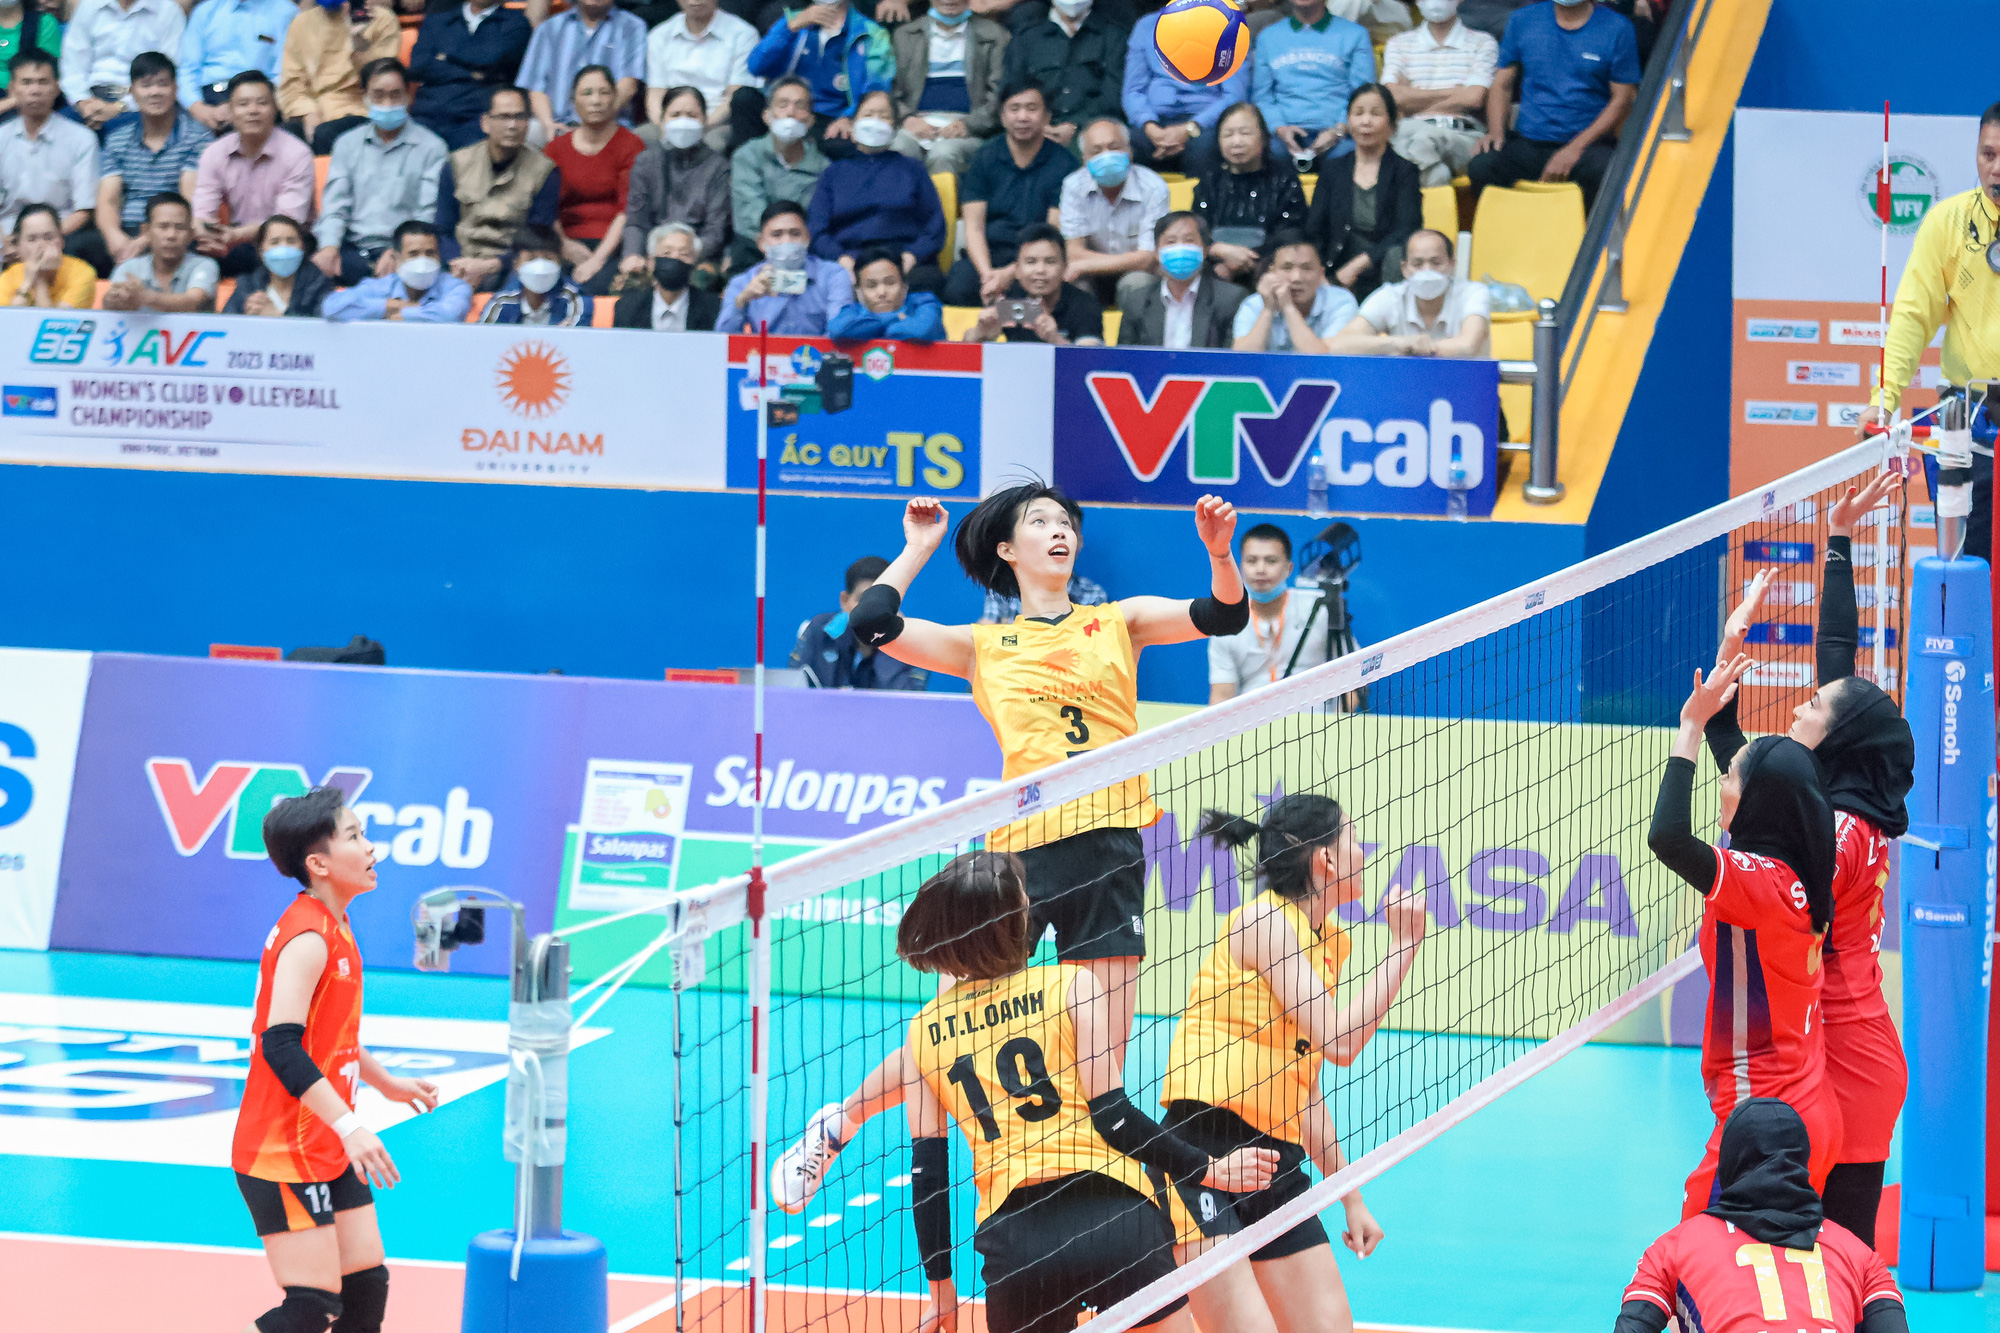 Vietnam kicks off 2023 Asian Women’s Club Volleyball Championship with victory over Iran